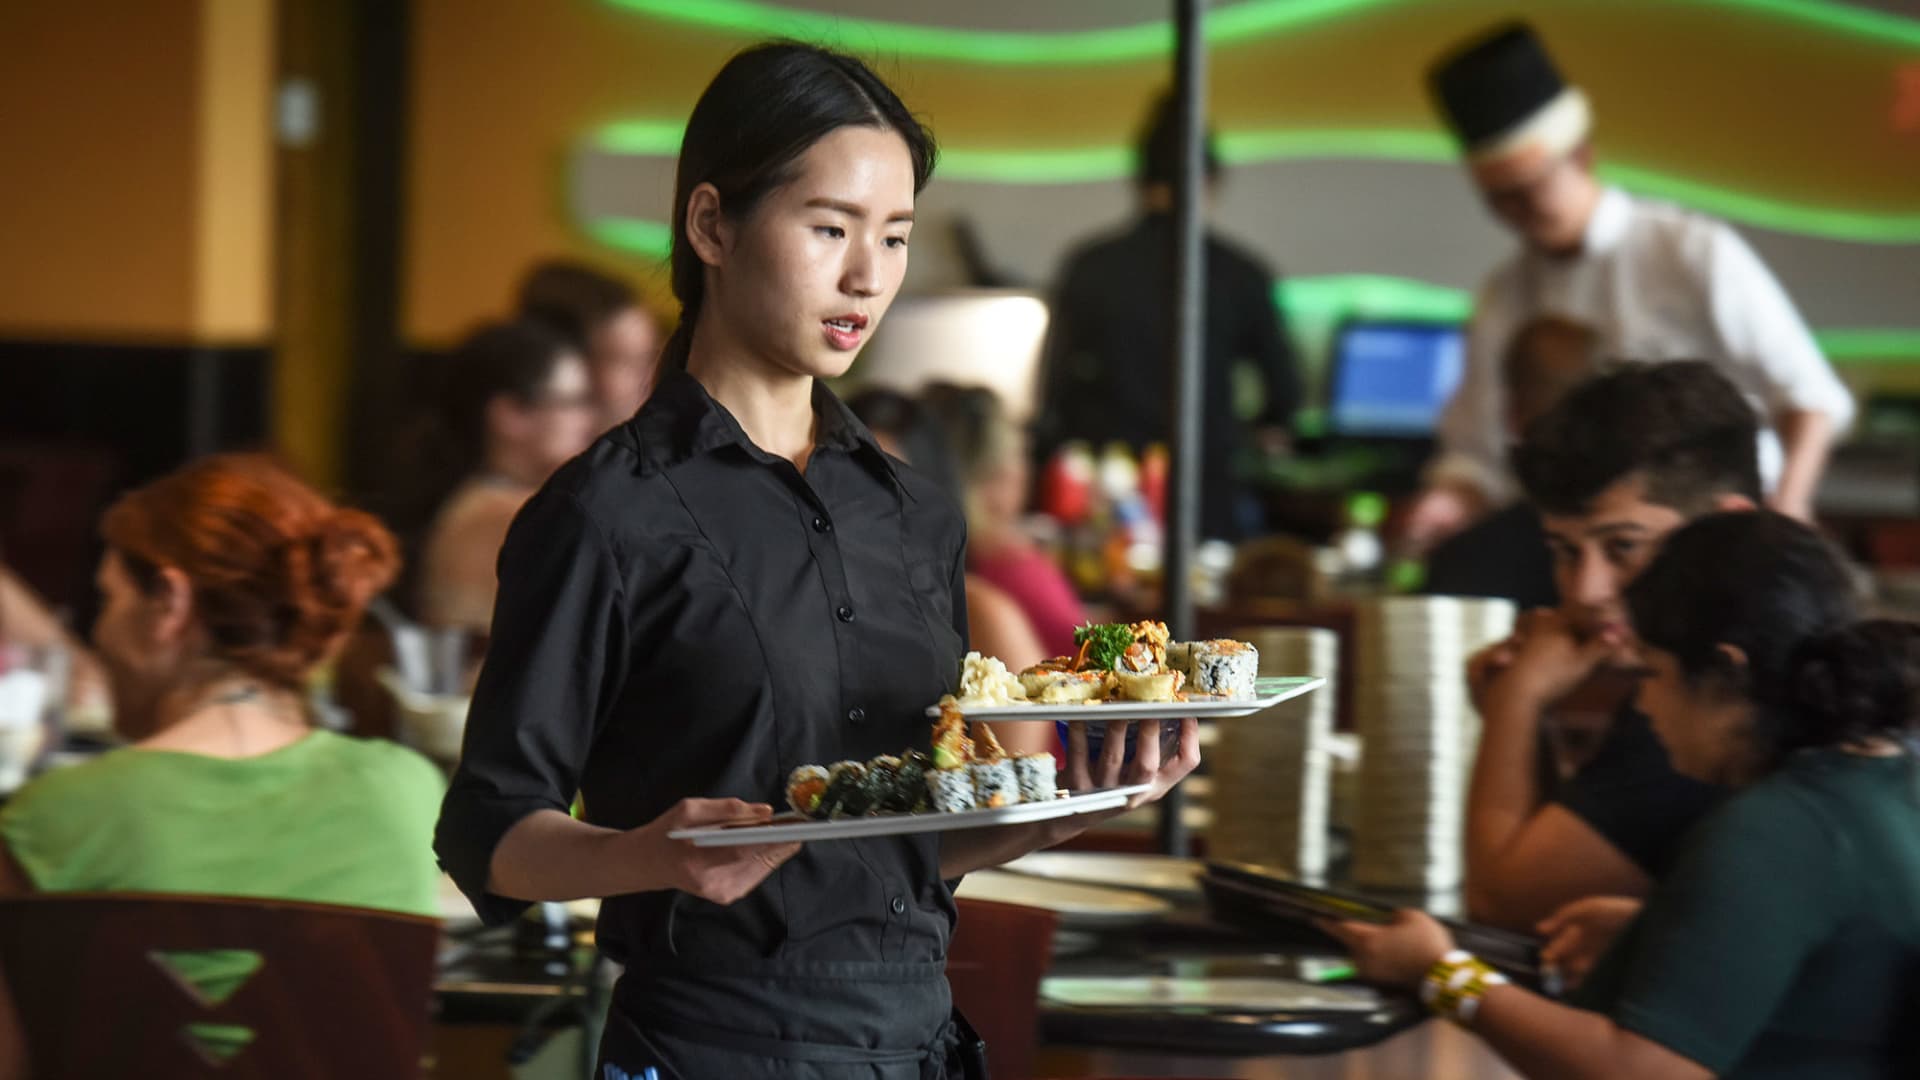 Restaurants see strong summer sales, while consumers fear inflation